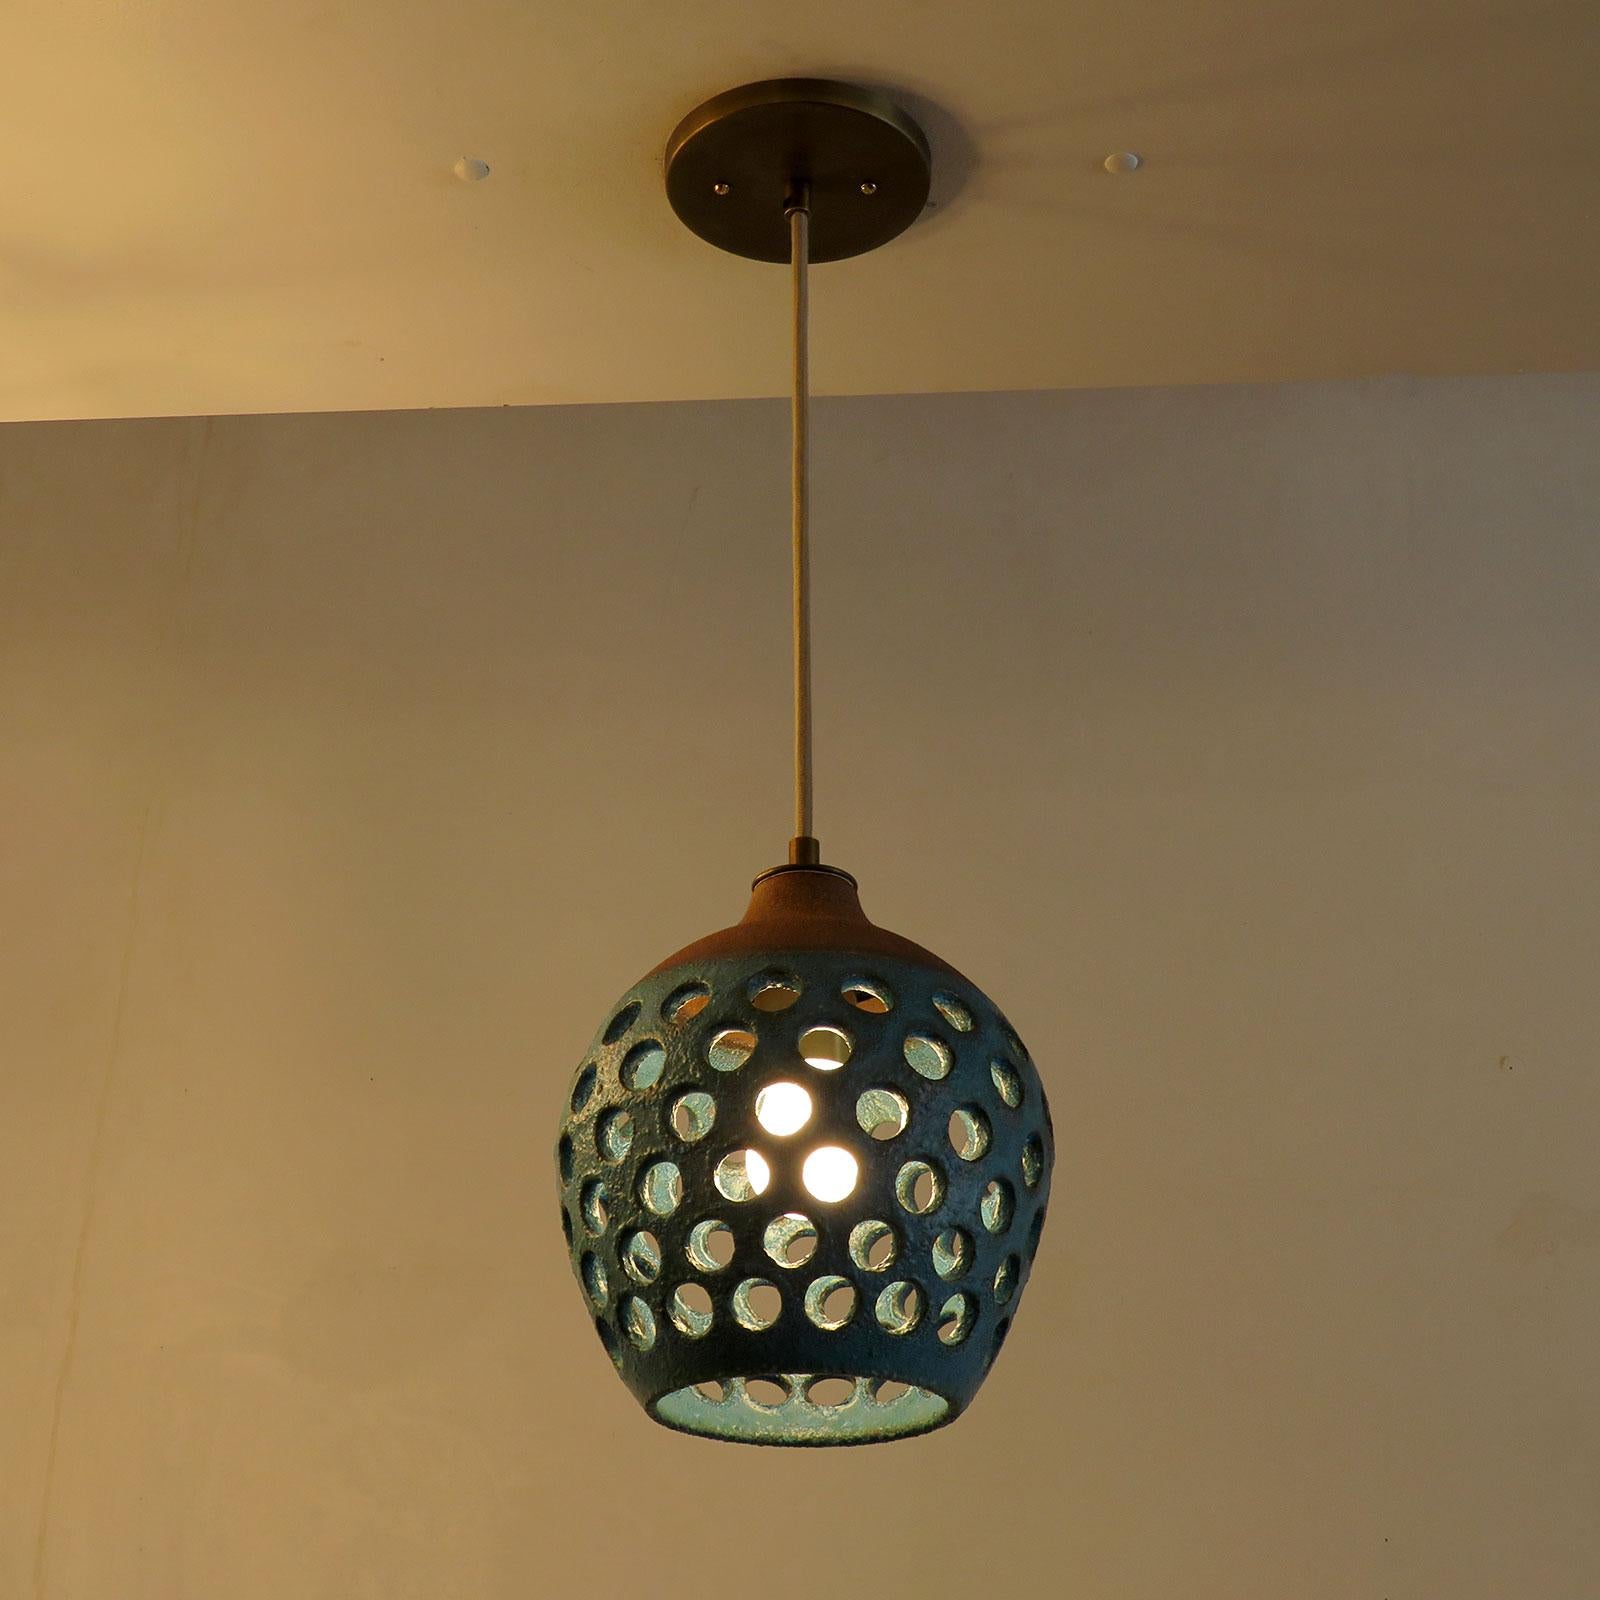 Petite Ceramic Pendant Light No.1202 by Heather Levine In New Condition For Sale In Los Angeles, CA